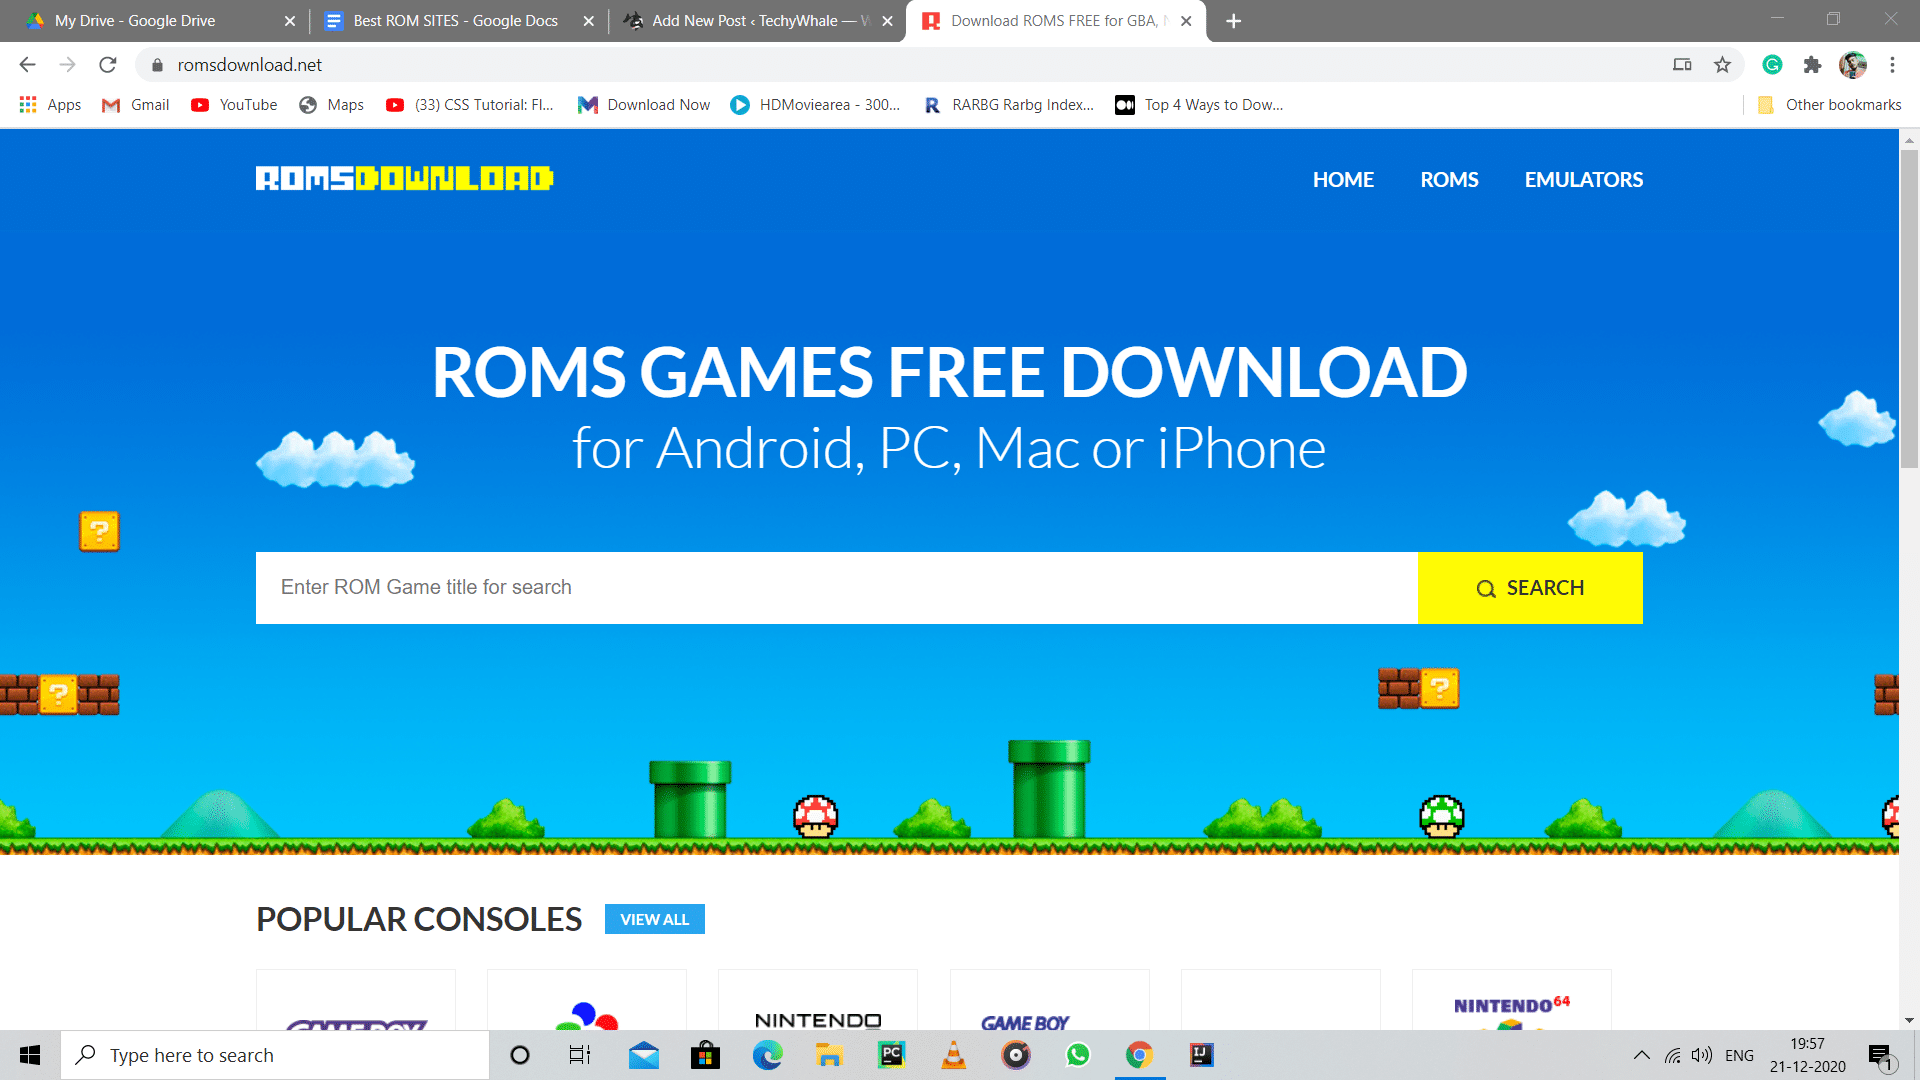 Step-By-Step tutorial on how to download ROMs